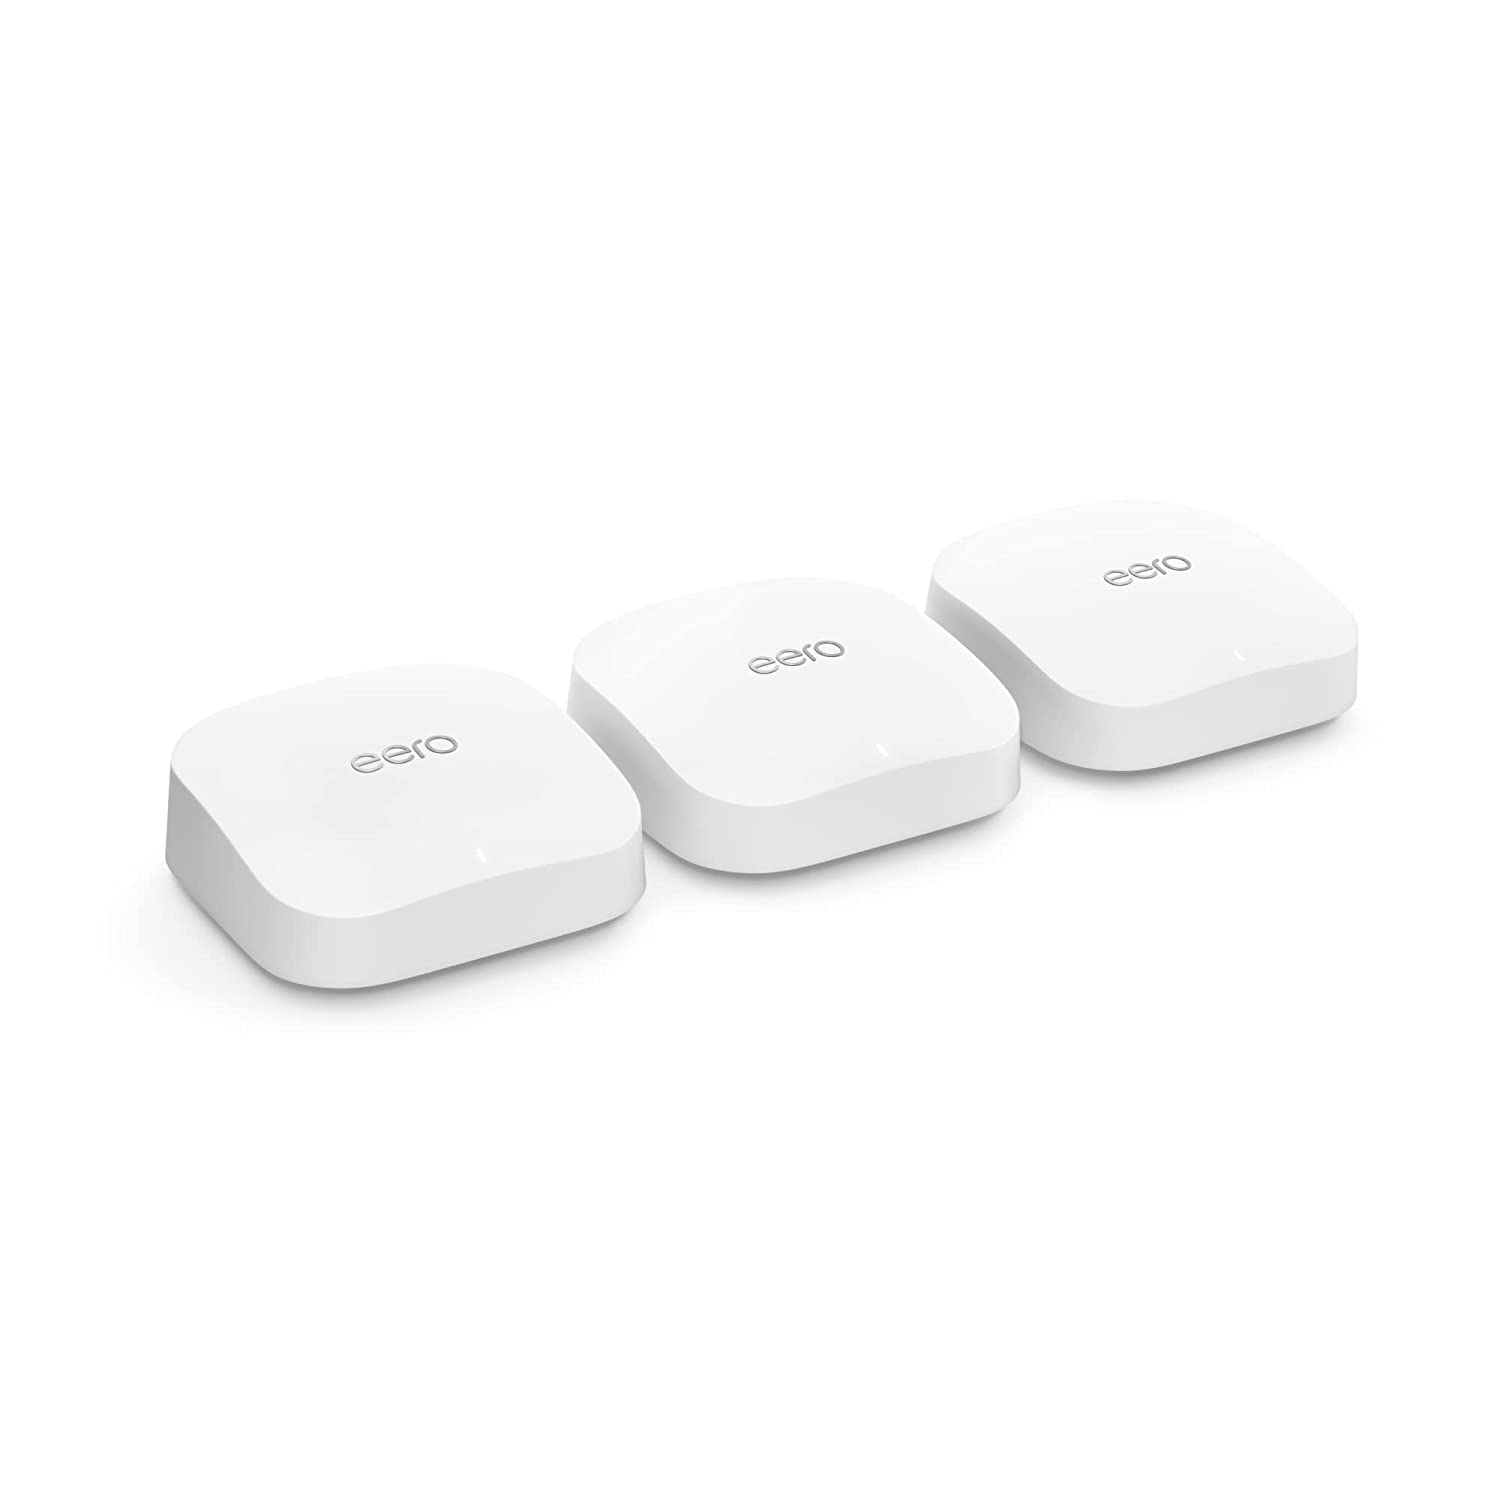 Introducing Amazon eero Pro 6E tri-band mesh Wi-Fi 6E system, with built-in Zigbee smart home hub (3-pack) - $419